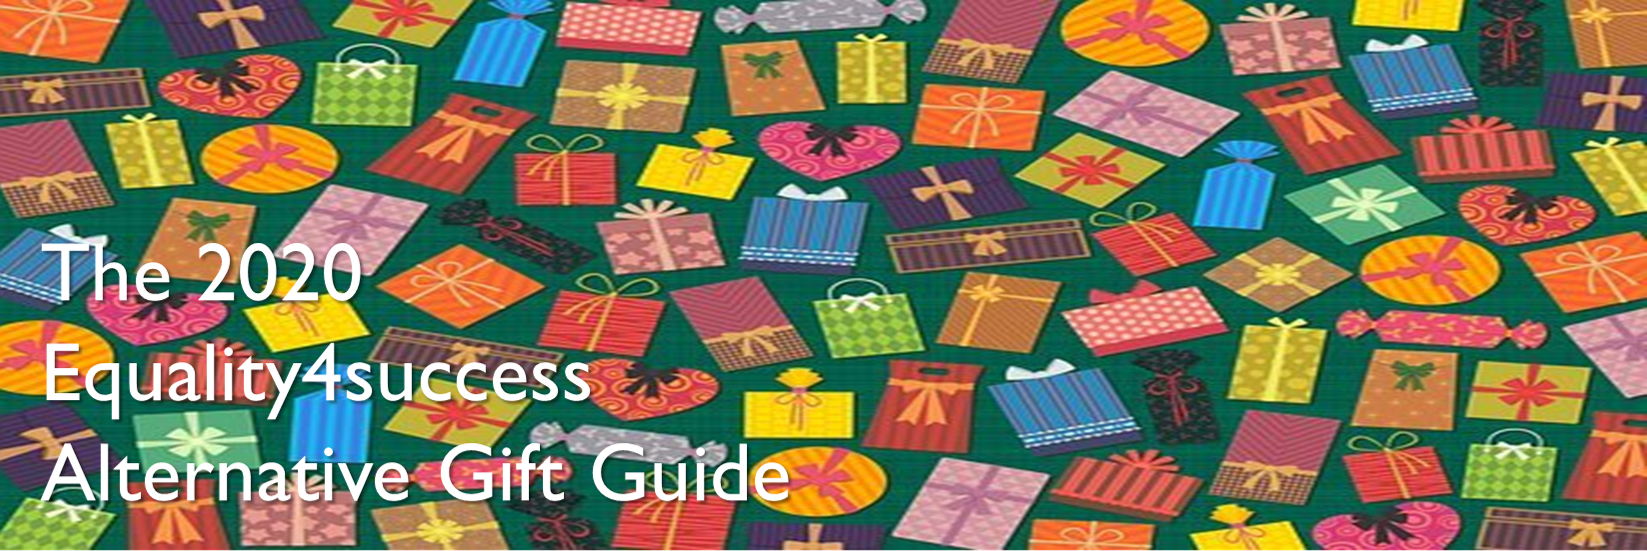 The equality4success Alternative Gift Guide